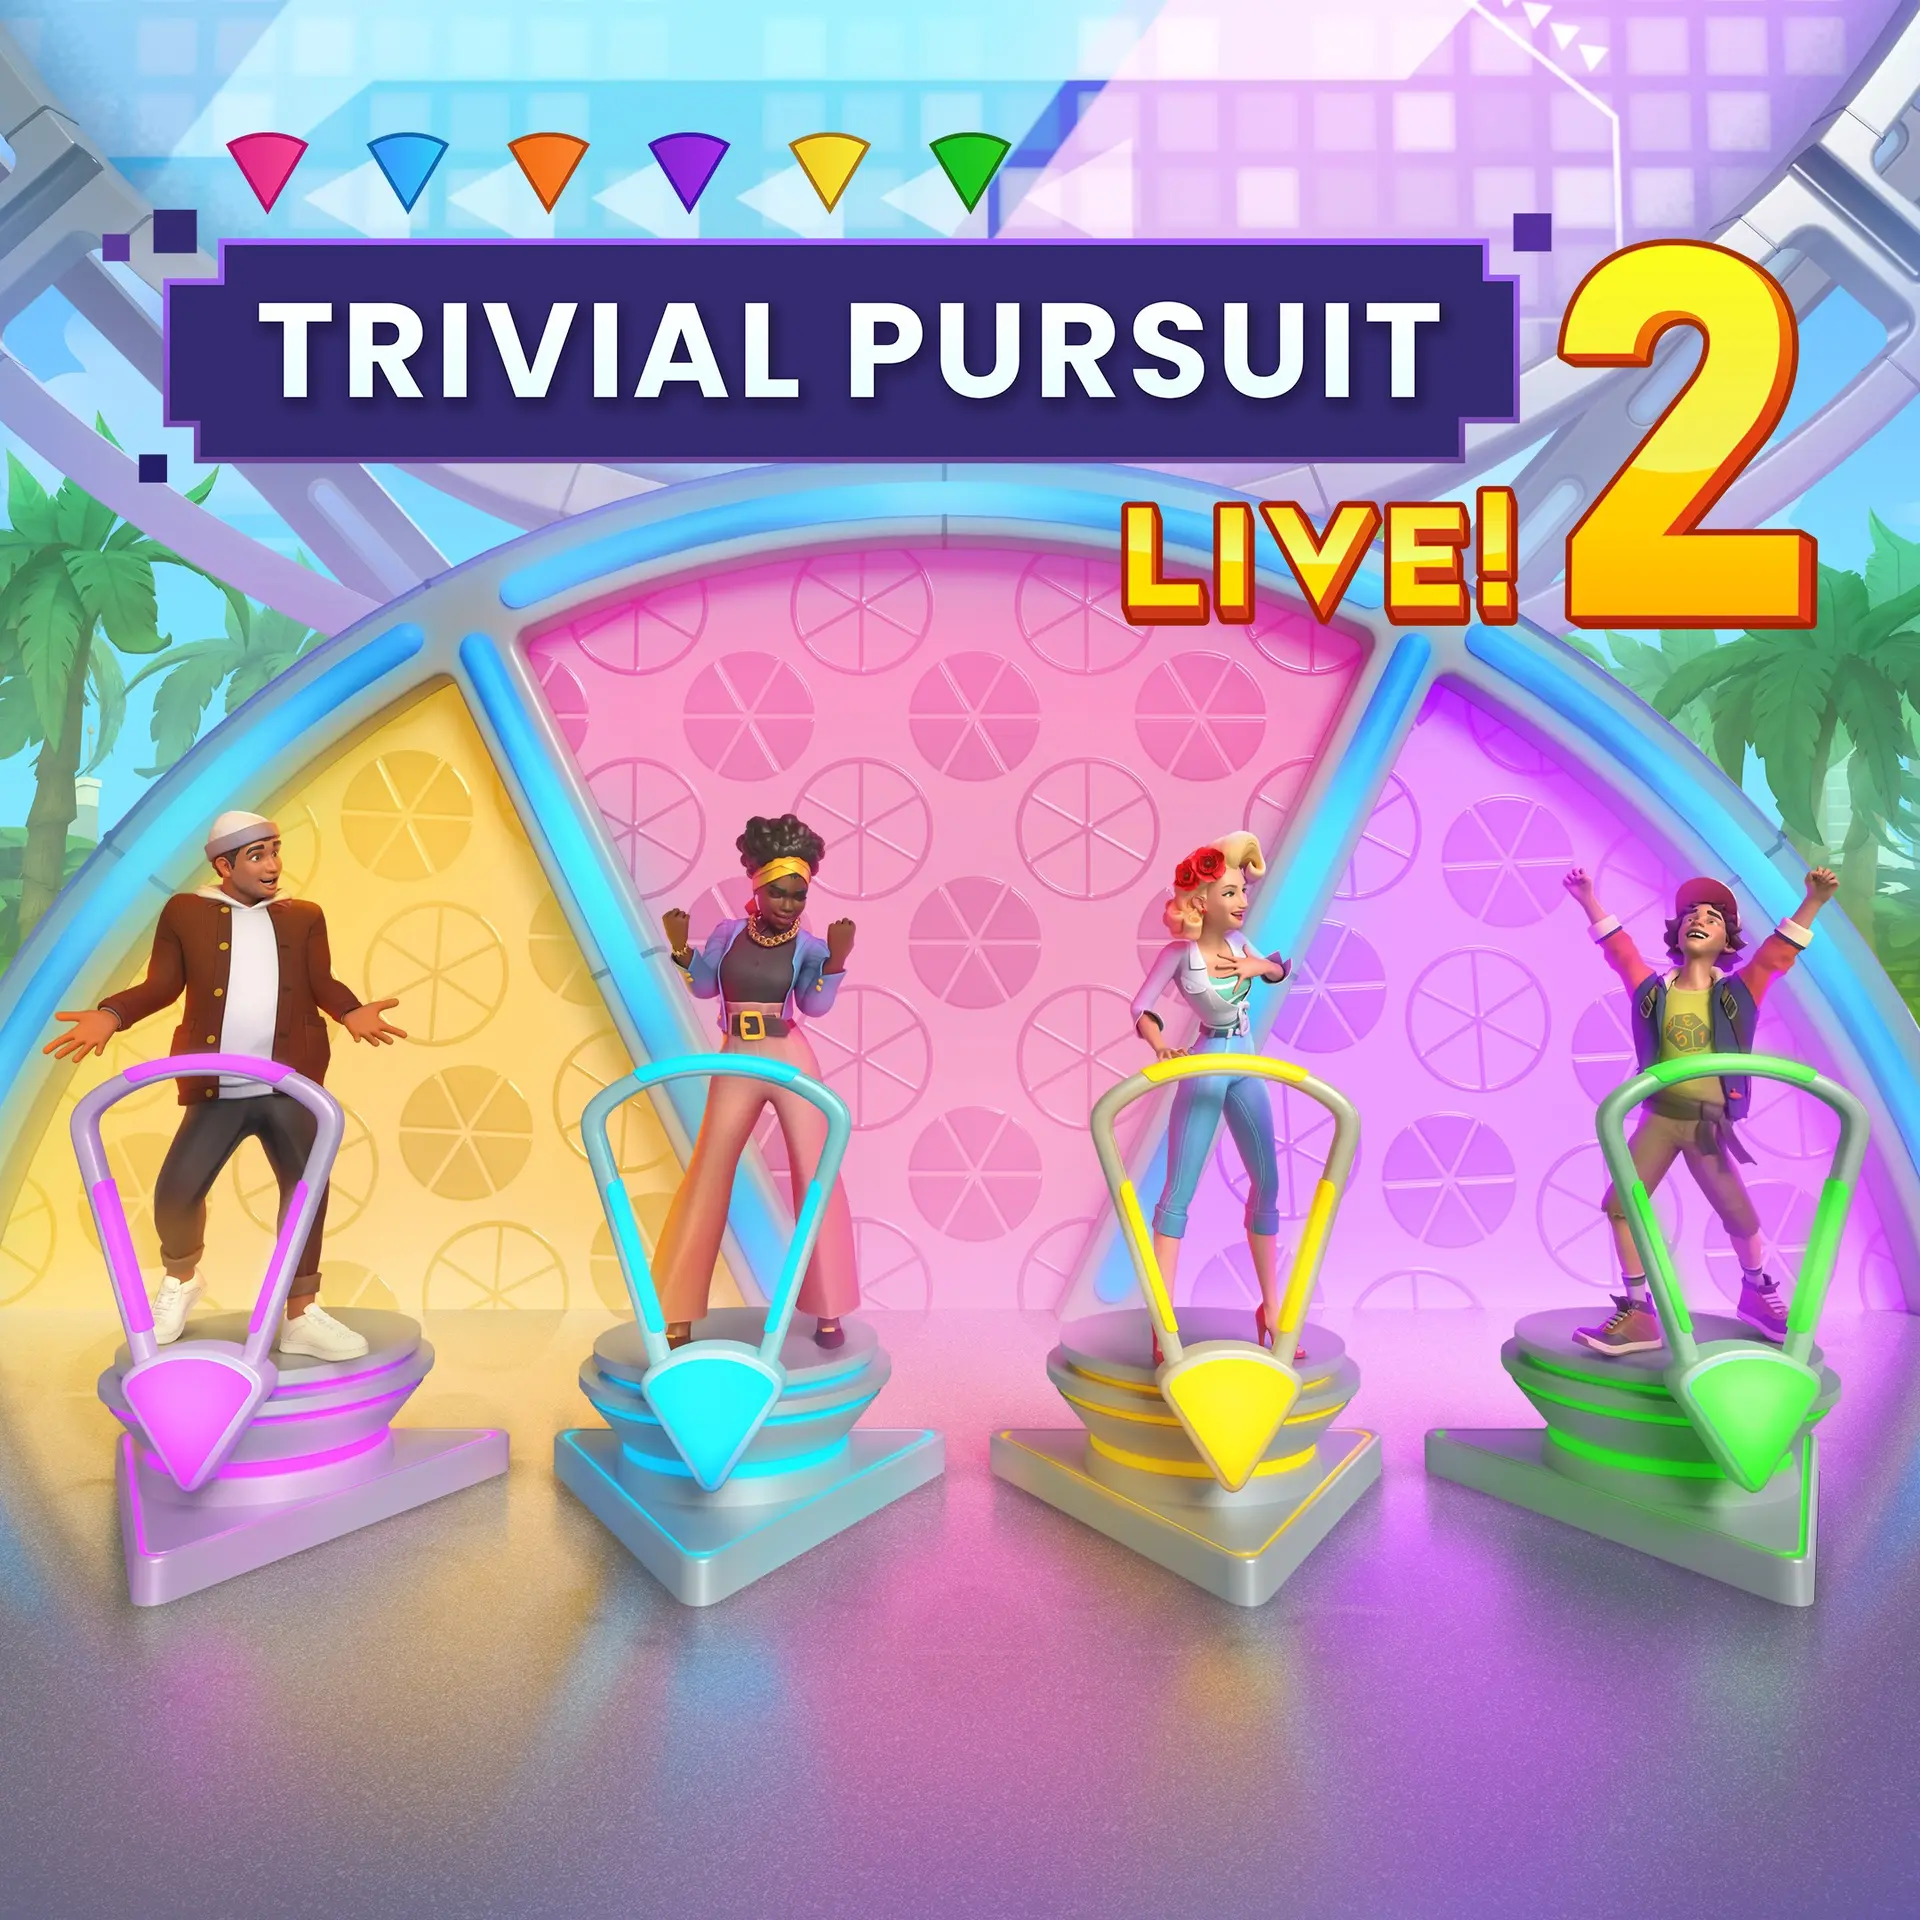 TRIVIAL PURSUIT Live! 2 (XBOX One - Cheapest Store)